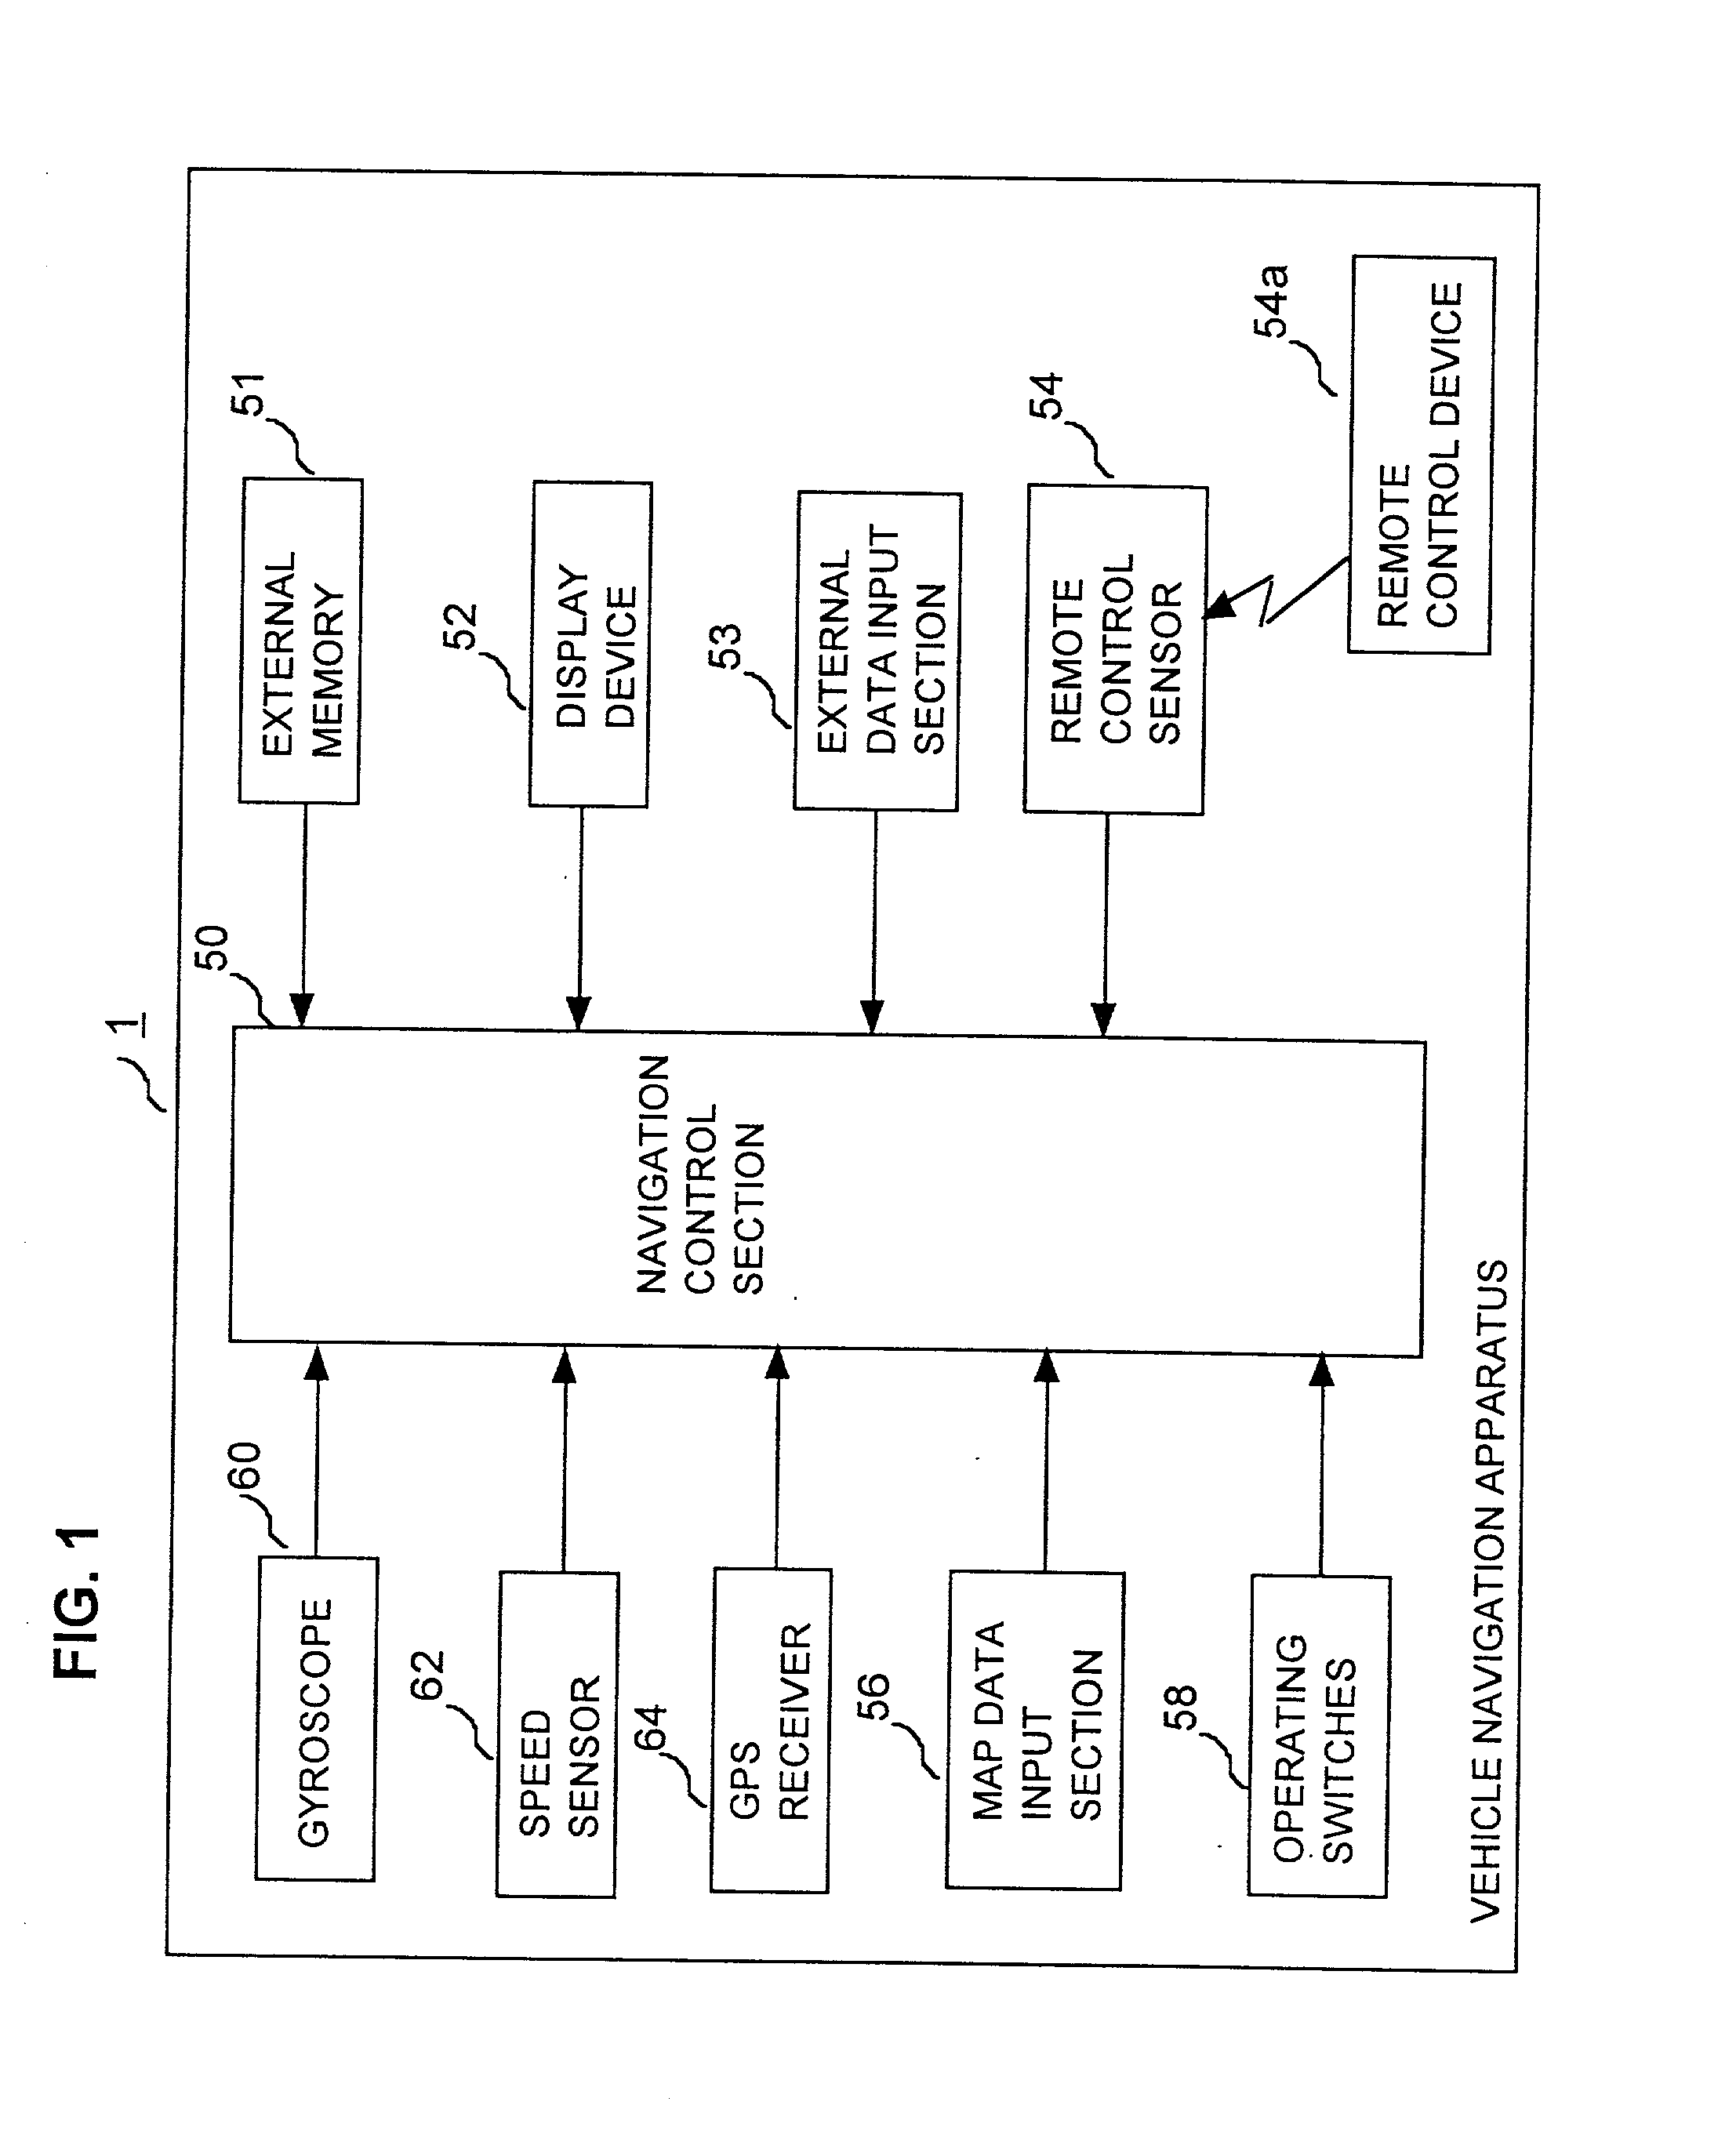 Vehicle navigation apparatus providing rapid correction for excessive error in dead reckoning estimates of vehicle travel direction by direct application of position and direction information derived from GPS position measurement data